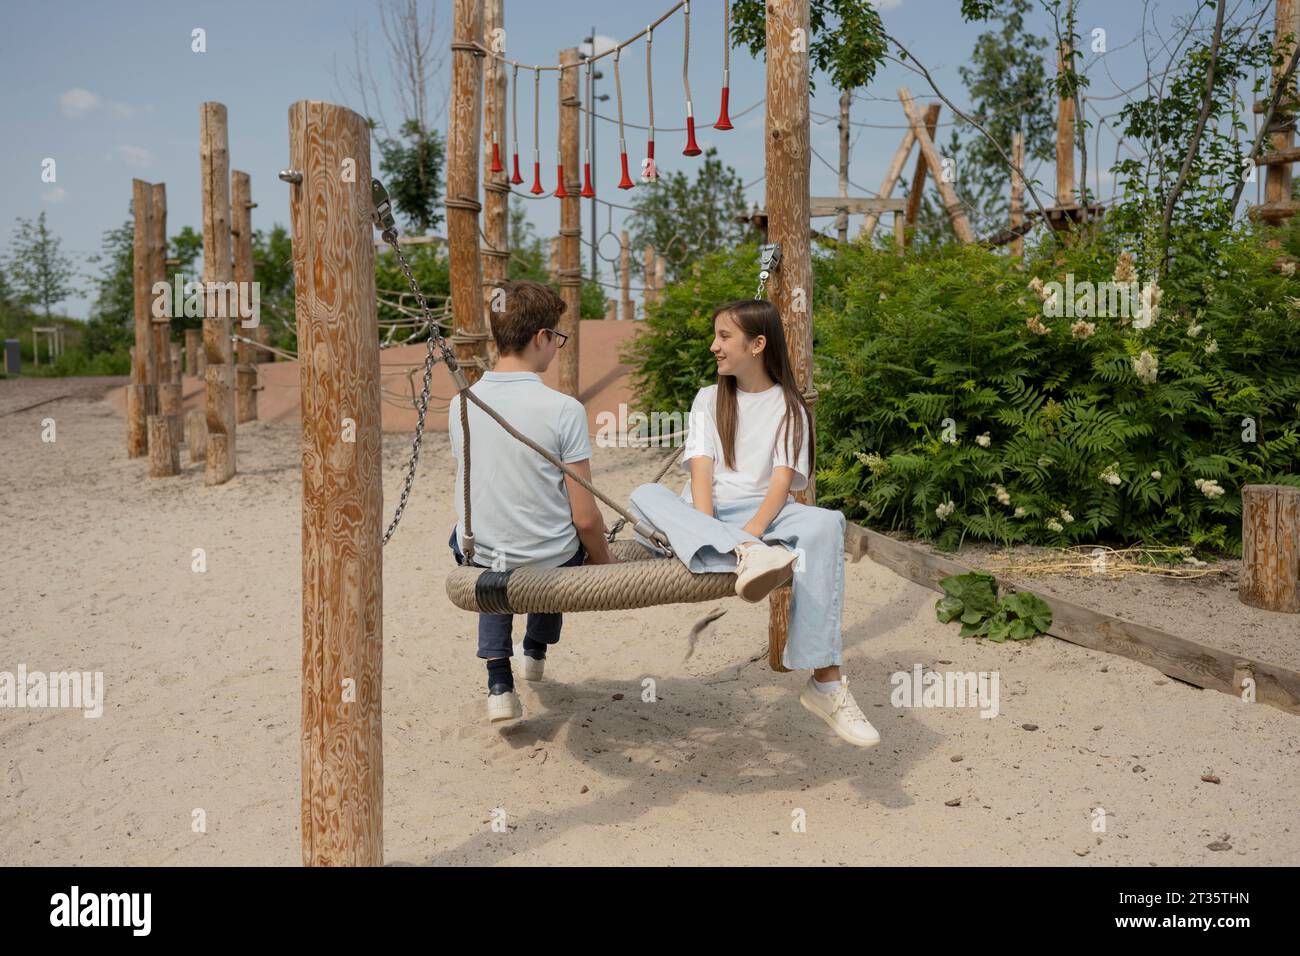 Friends spending leisure time sitting on swing at playground Stock Photo